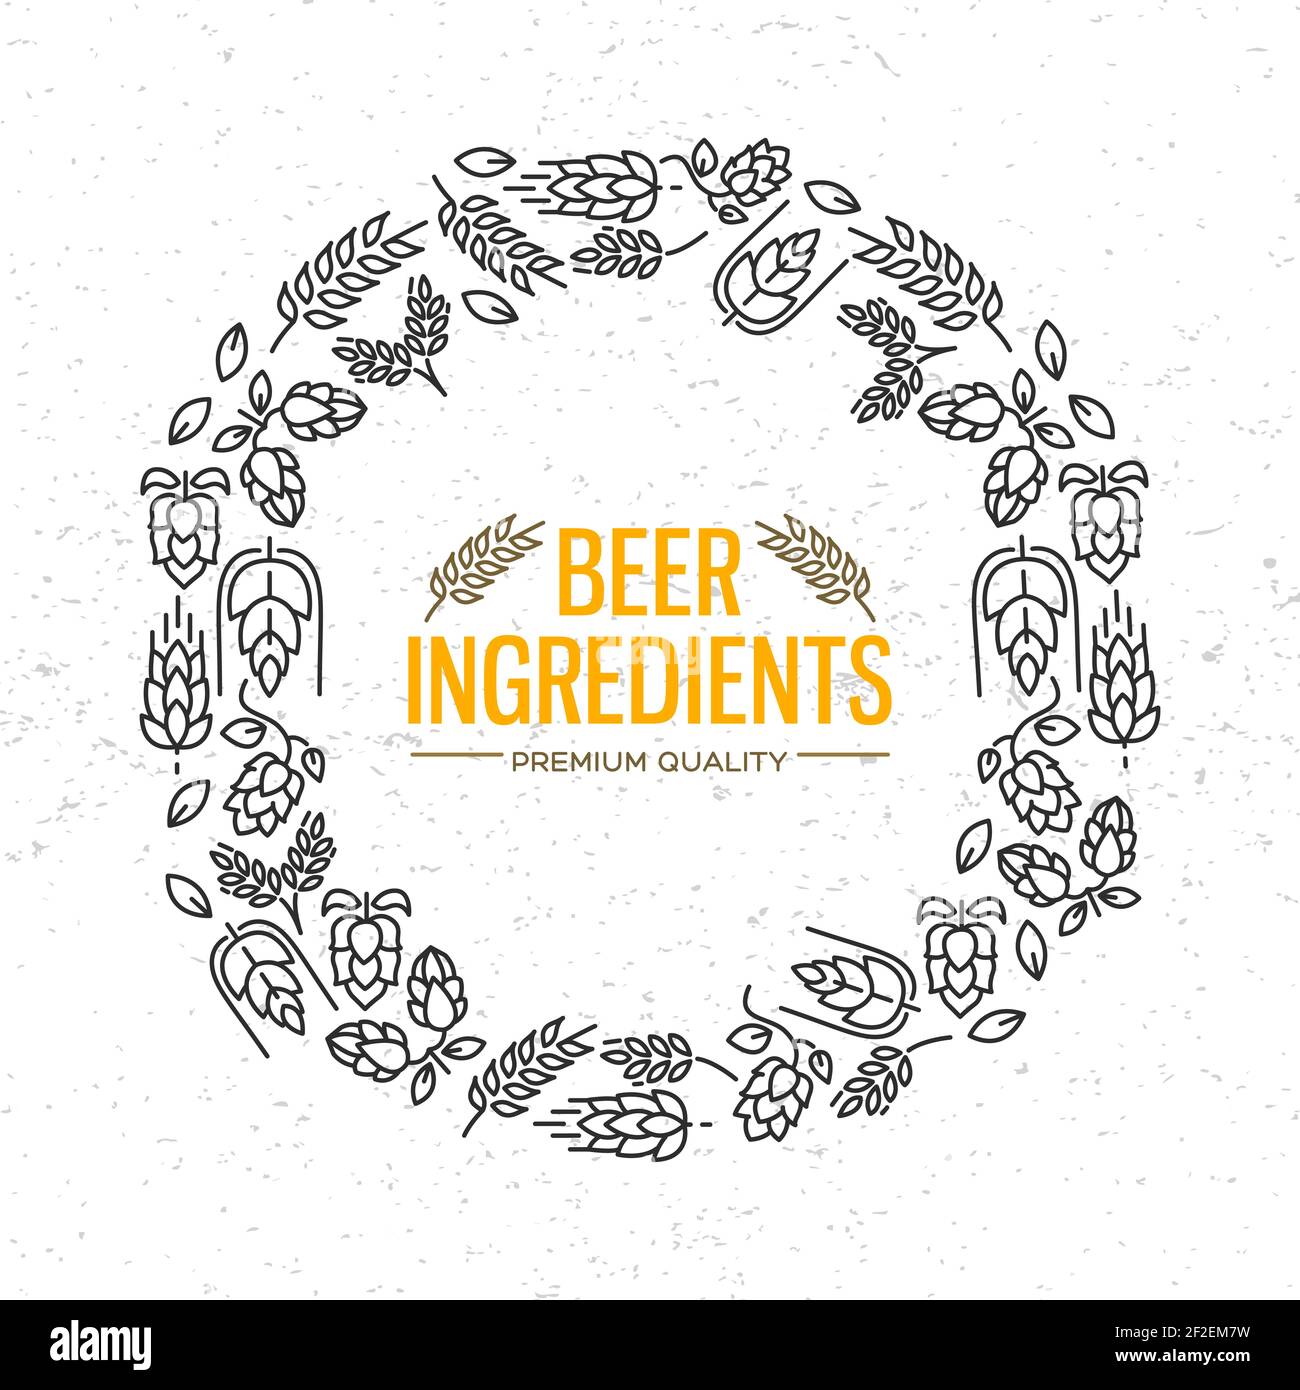 Stylish design round frame with icons of flowers, twig of hops, blossom, malt around the words beer ingredients in the centre vector illustration Stock Vector